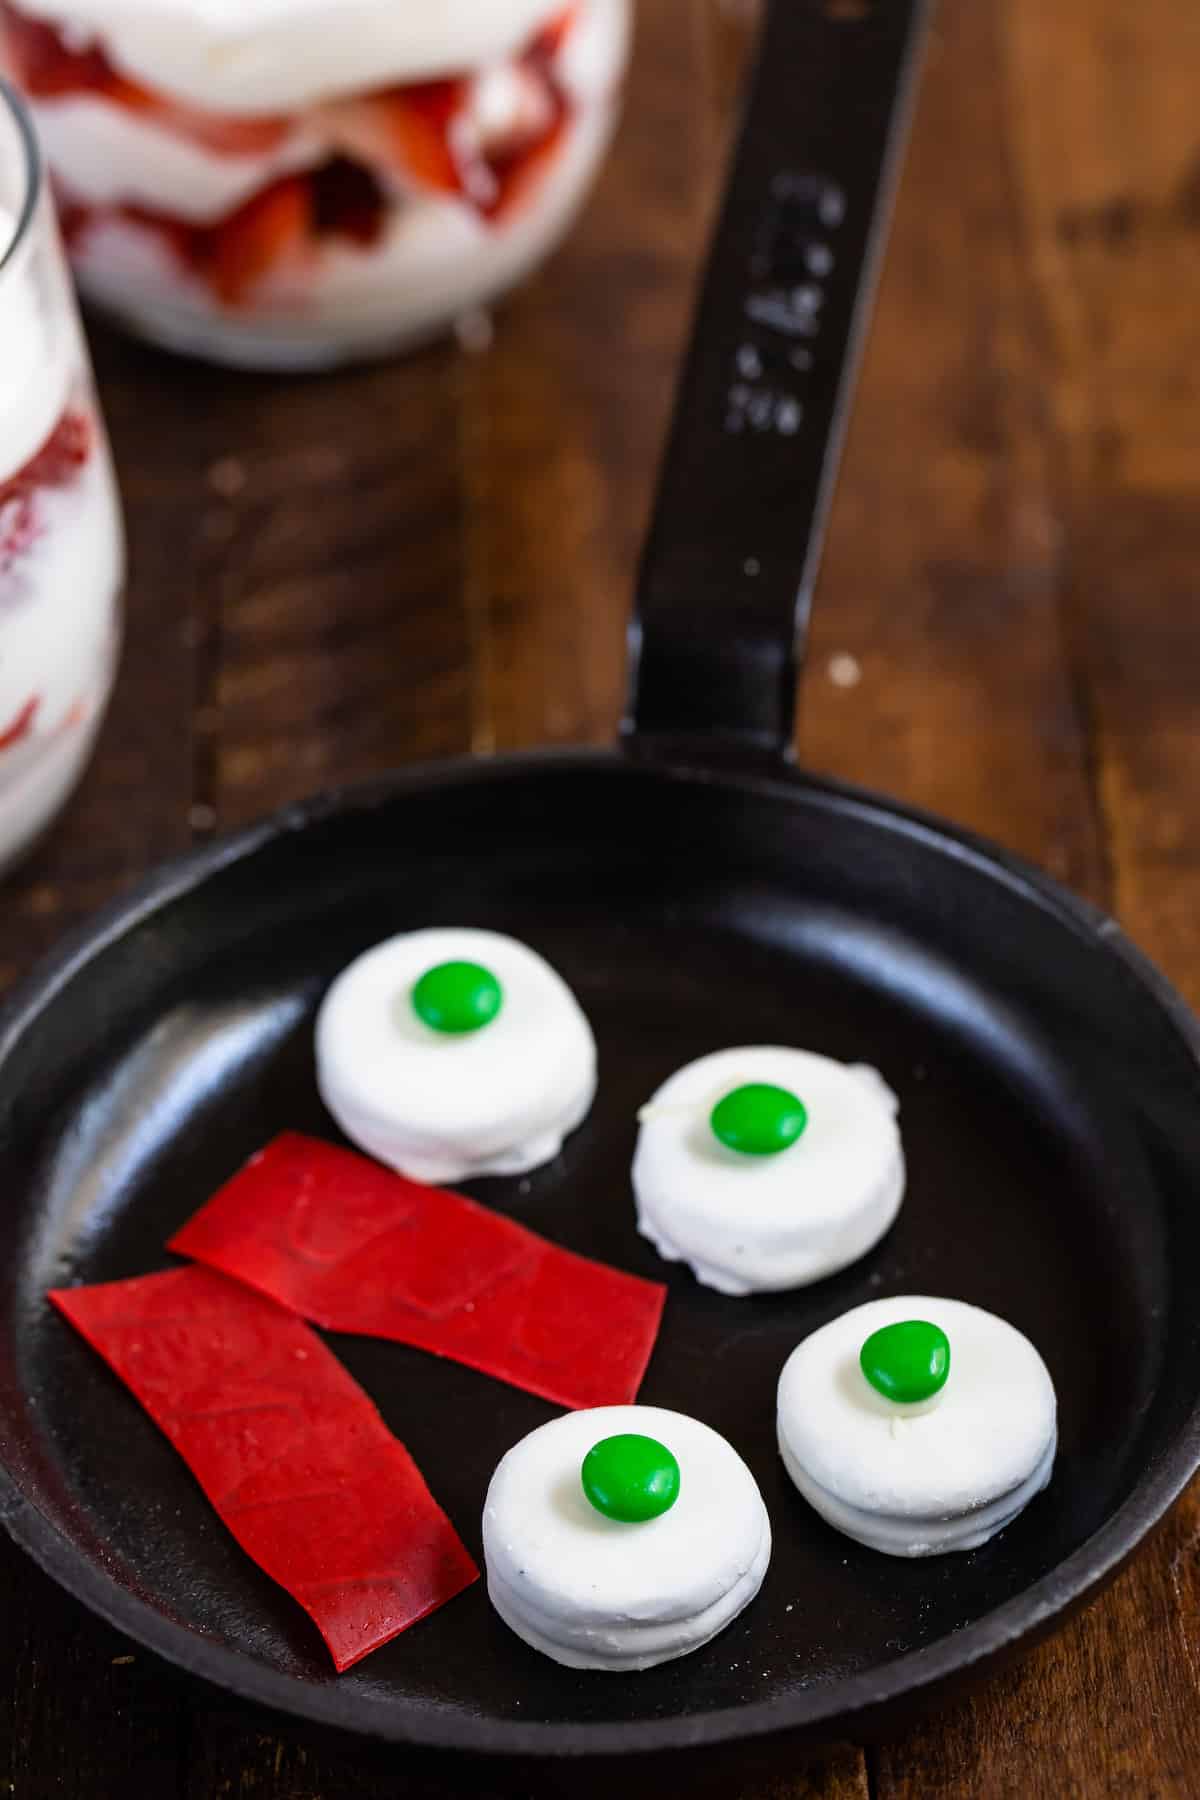 green eggs and ham made from various candies in a small metal pan.